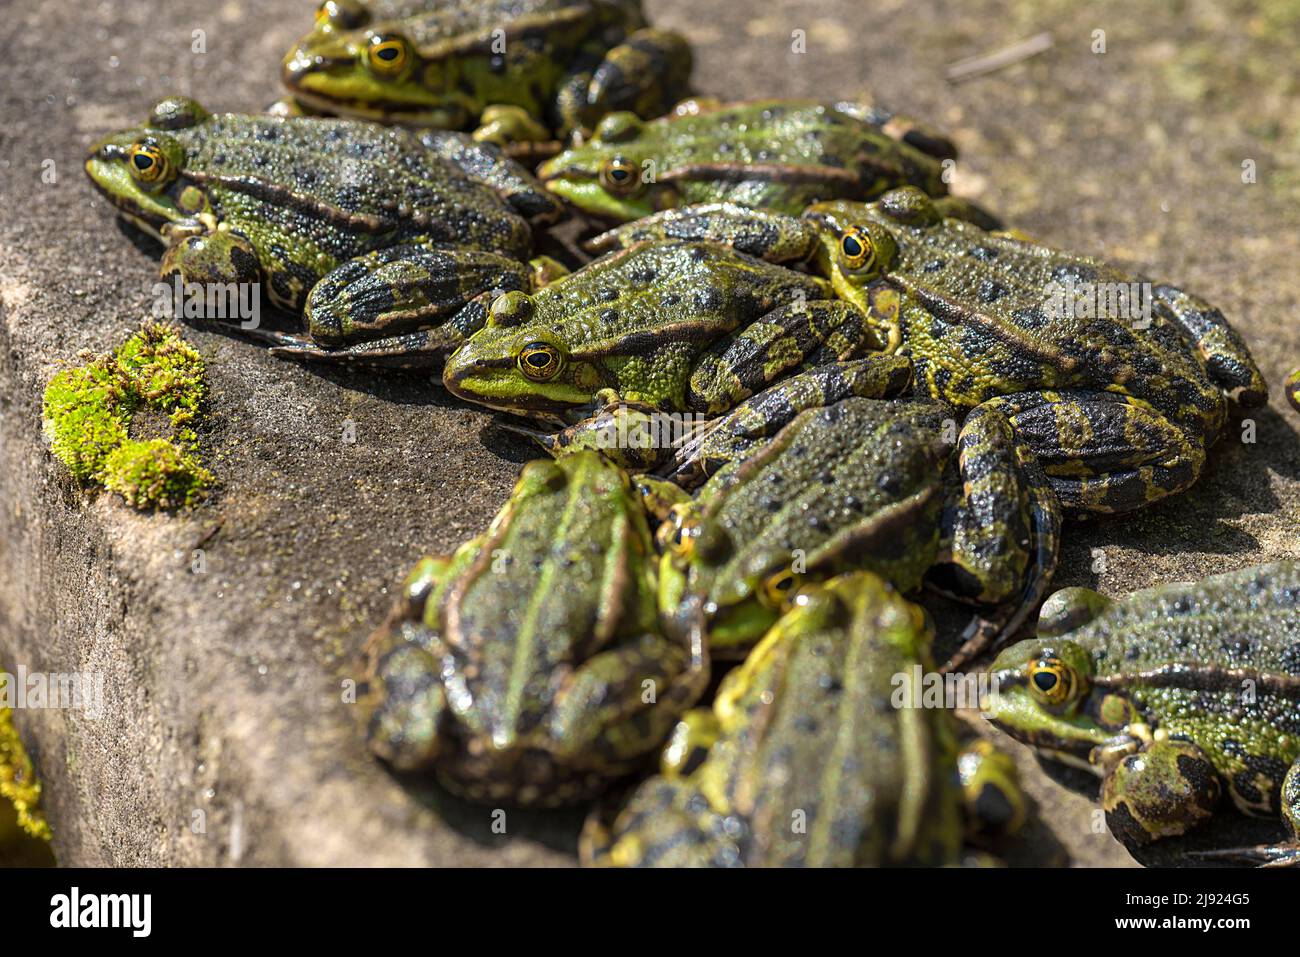 Green frogs (Pelophylax esculentus) warming themselves in the sun, Botanical Garden, Erlangen, Middle Franconia, Bavaria, Germany Stock Photo